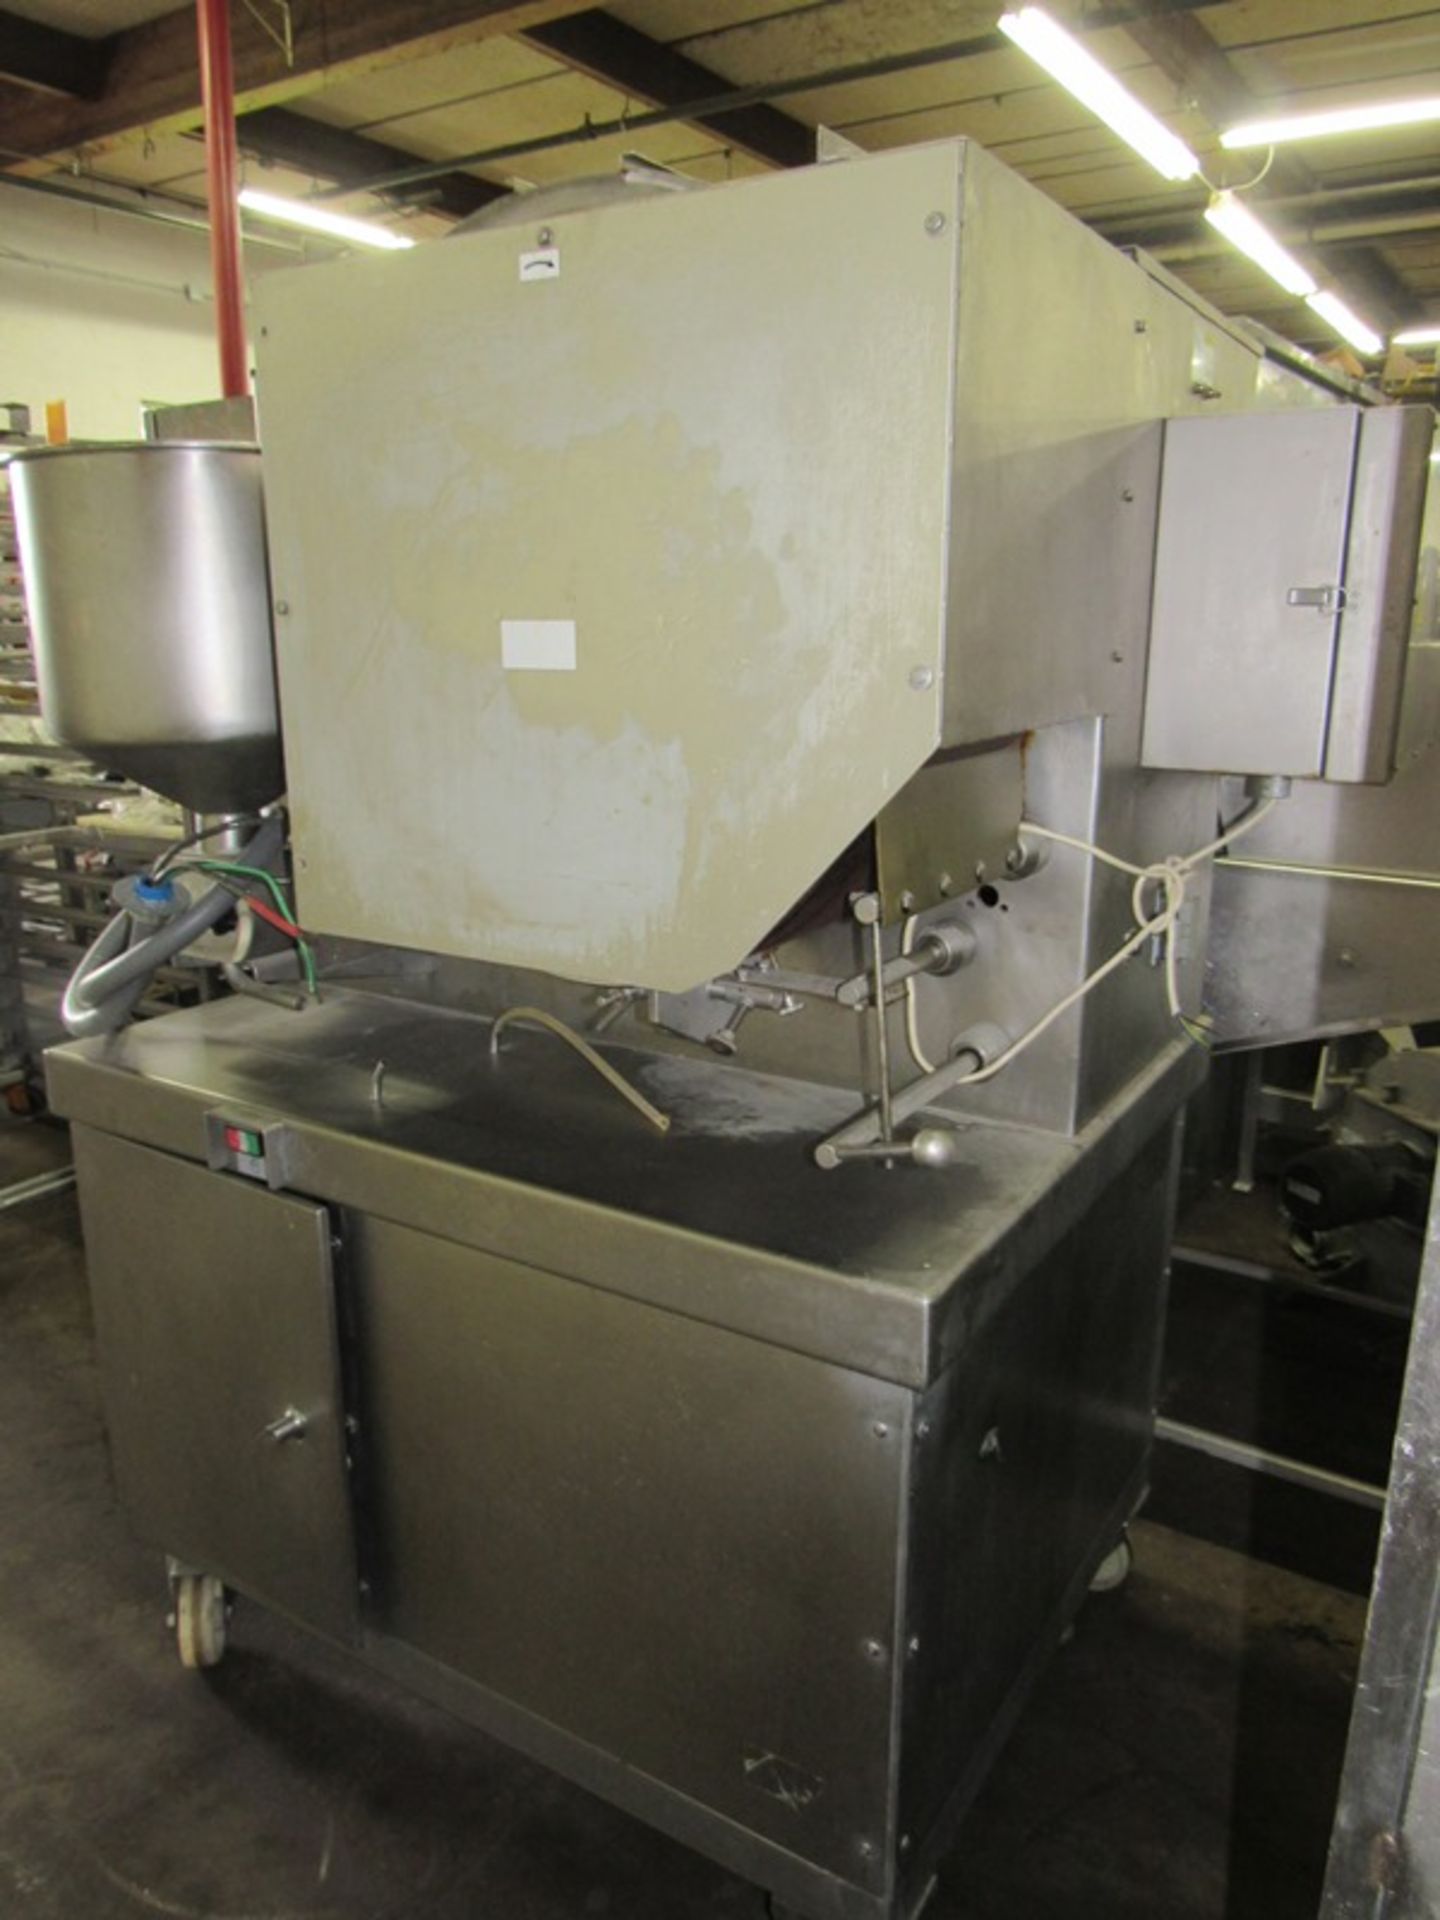 ANKO Mdl. SRPF-20A Drum Cooker, manual controls with digital readouts, 480 volts - Image 3 of 7